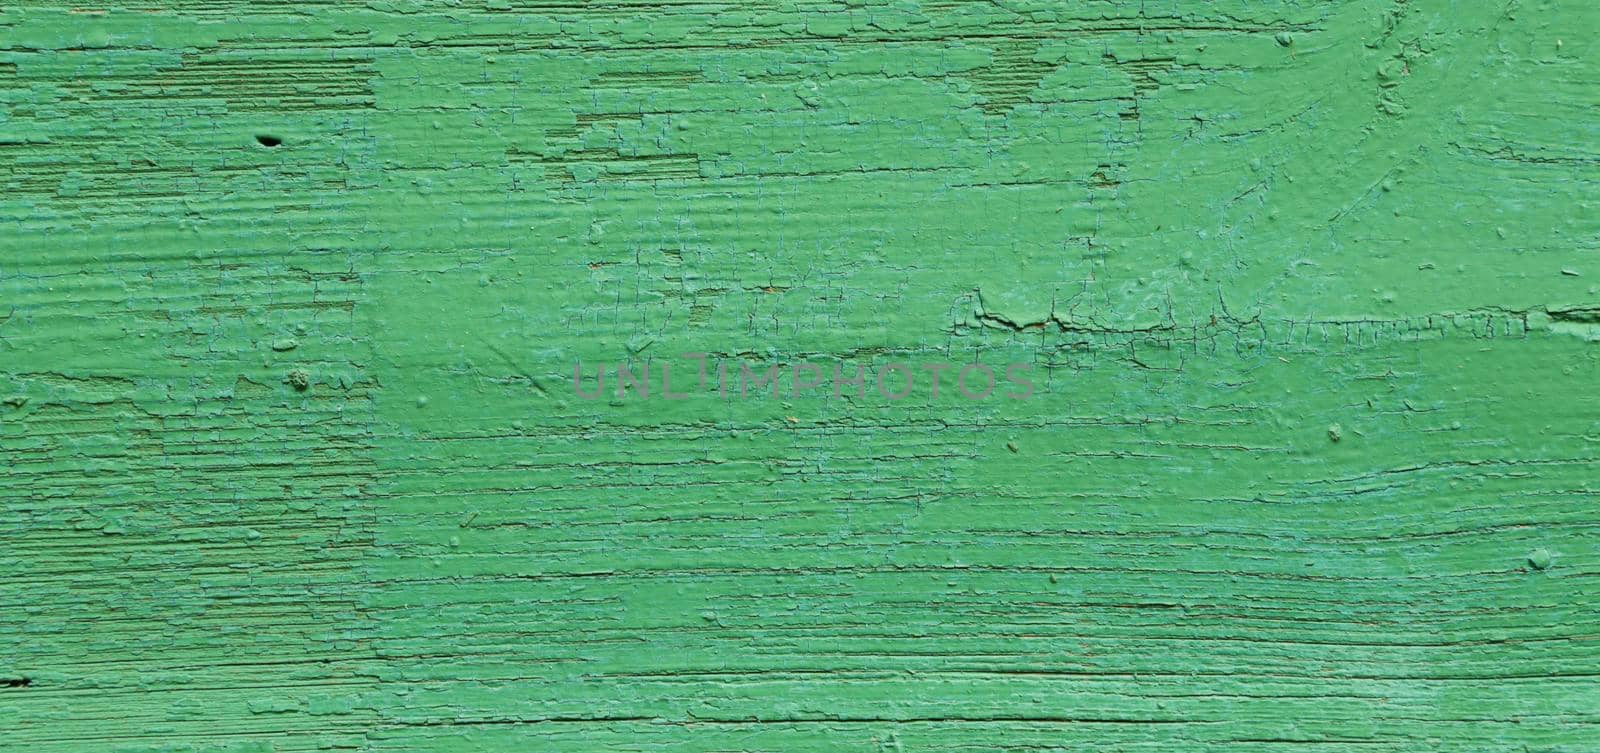 The old wood texture with natural patterns. Old paint damaged by the weather.